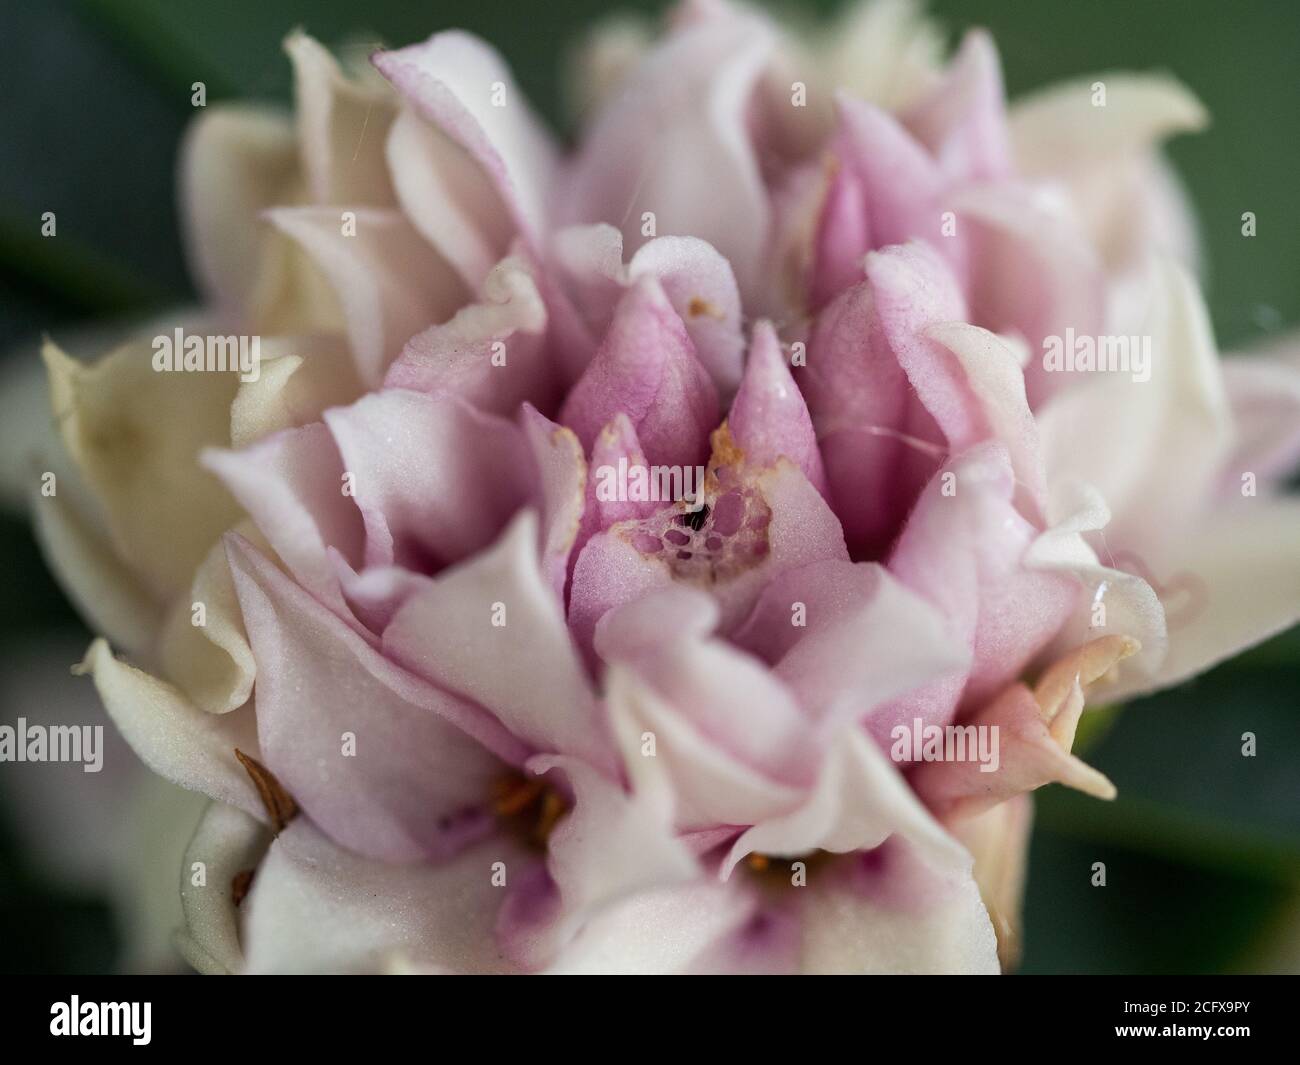 Flower Macro, Bunched together Daphne flowers, amazingly fragrant, pastel pink, purple and mauve and cream blooms detailing petals, green background Stock Photo